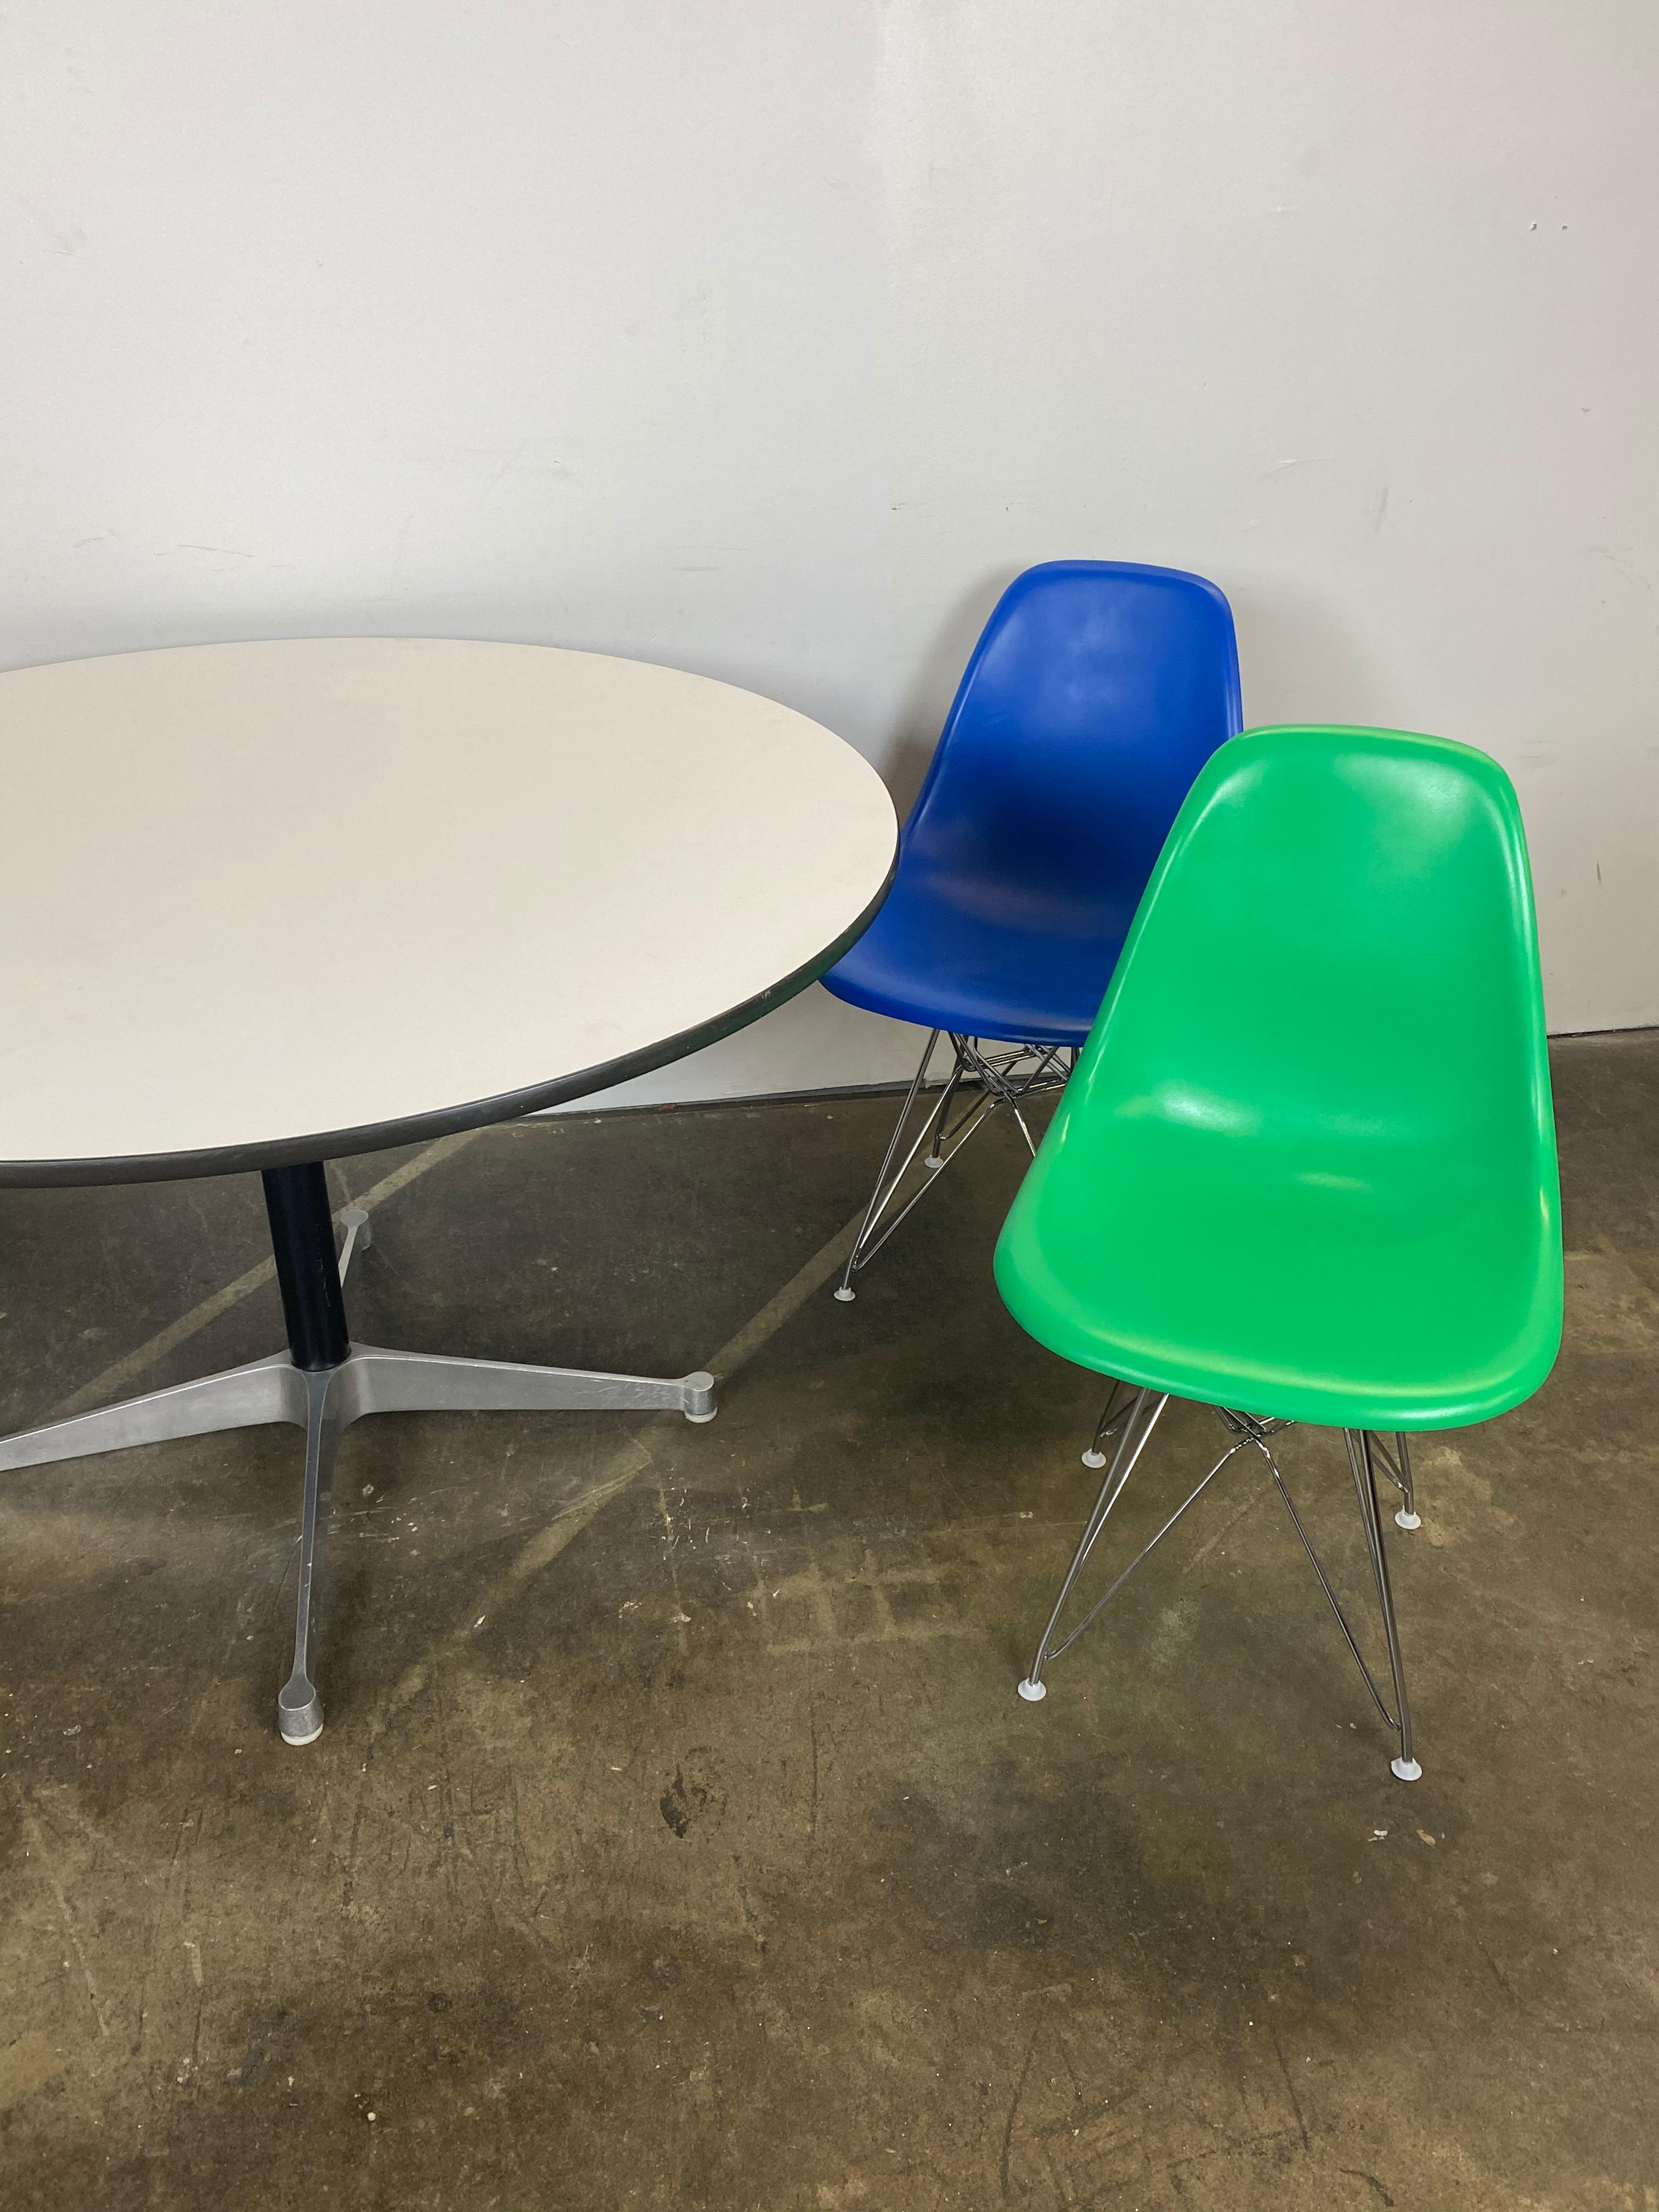 Gorgeous and bright set of Herman Miller Eames dining chairs and table. All authentic Herman Miller. Chairs are vintage but have been color coated in fun colors. New Eiffel bases finished in chrome with nylon glides for same use on multiple